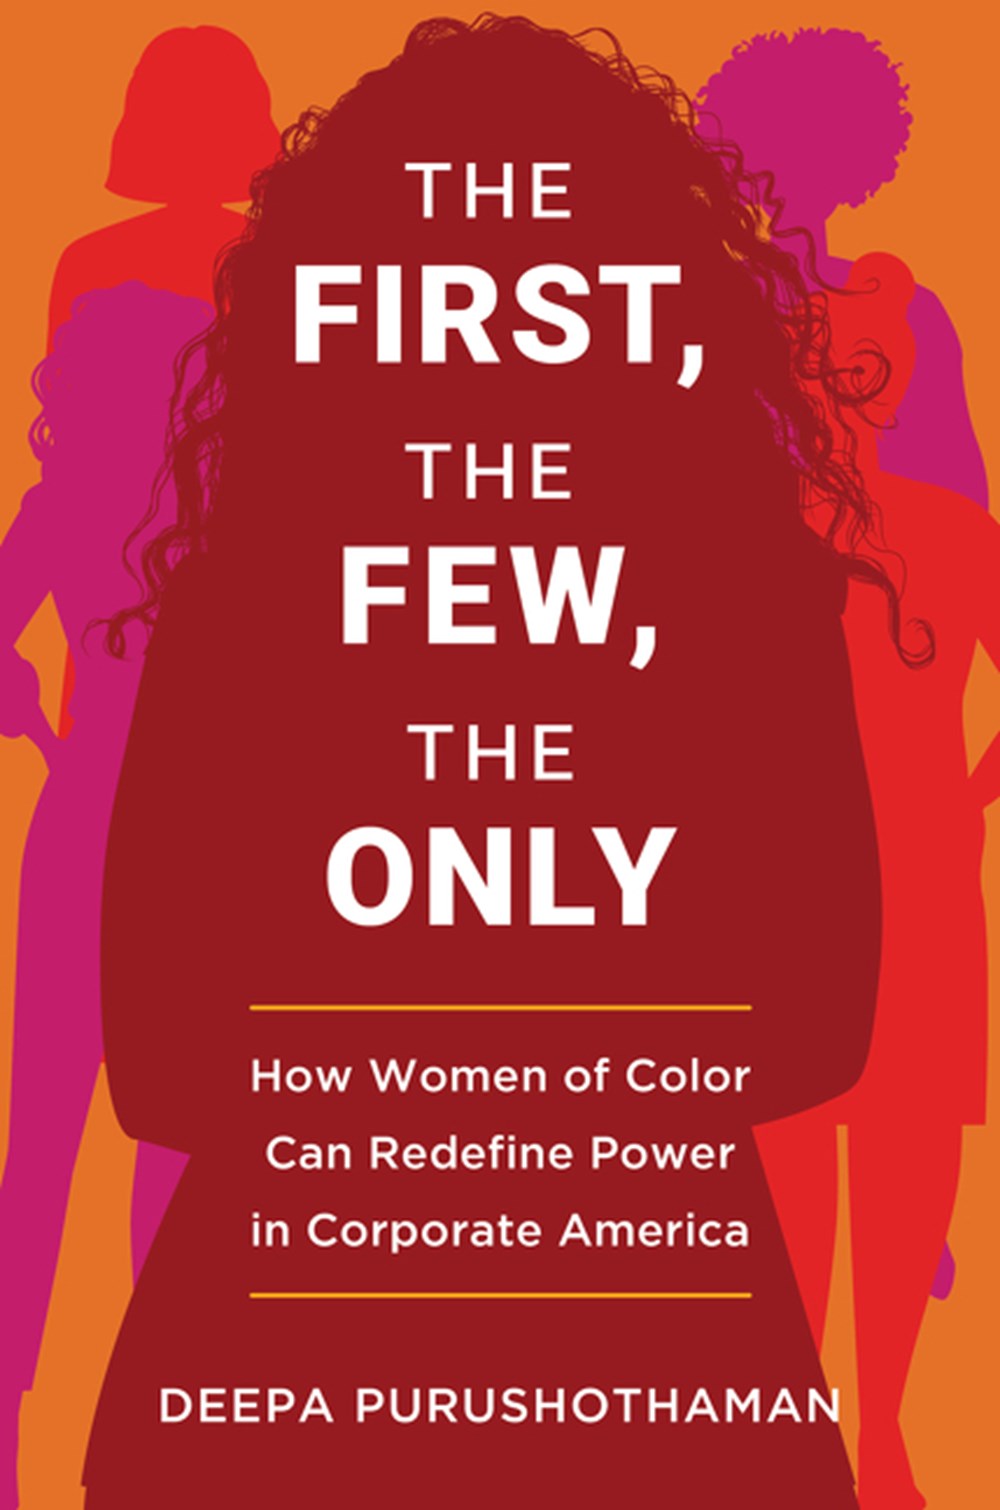 First, the Few, the Only: How Women of Color Can Redefine Power in Corporate America